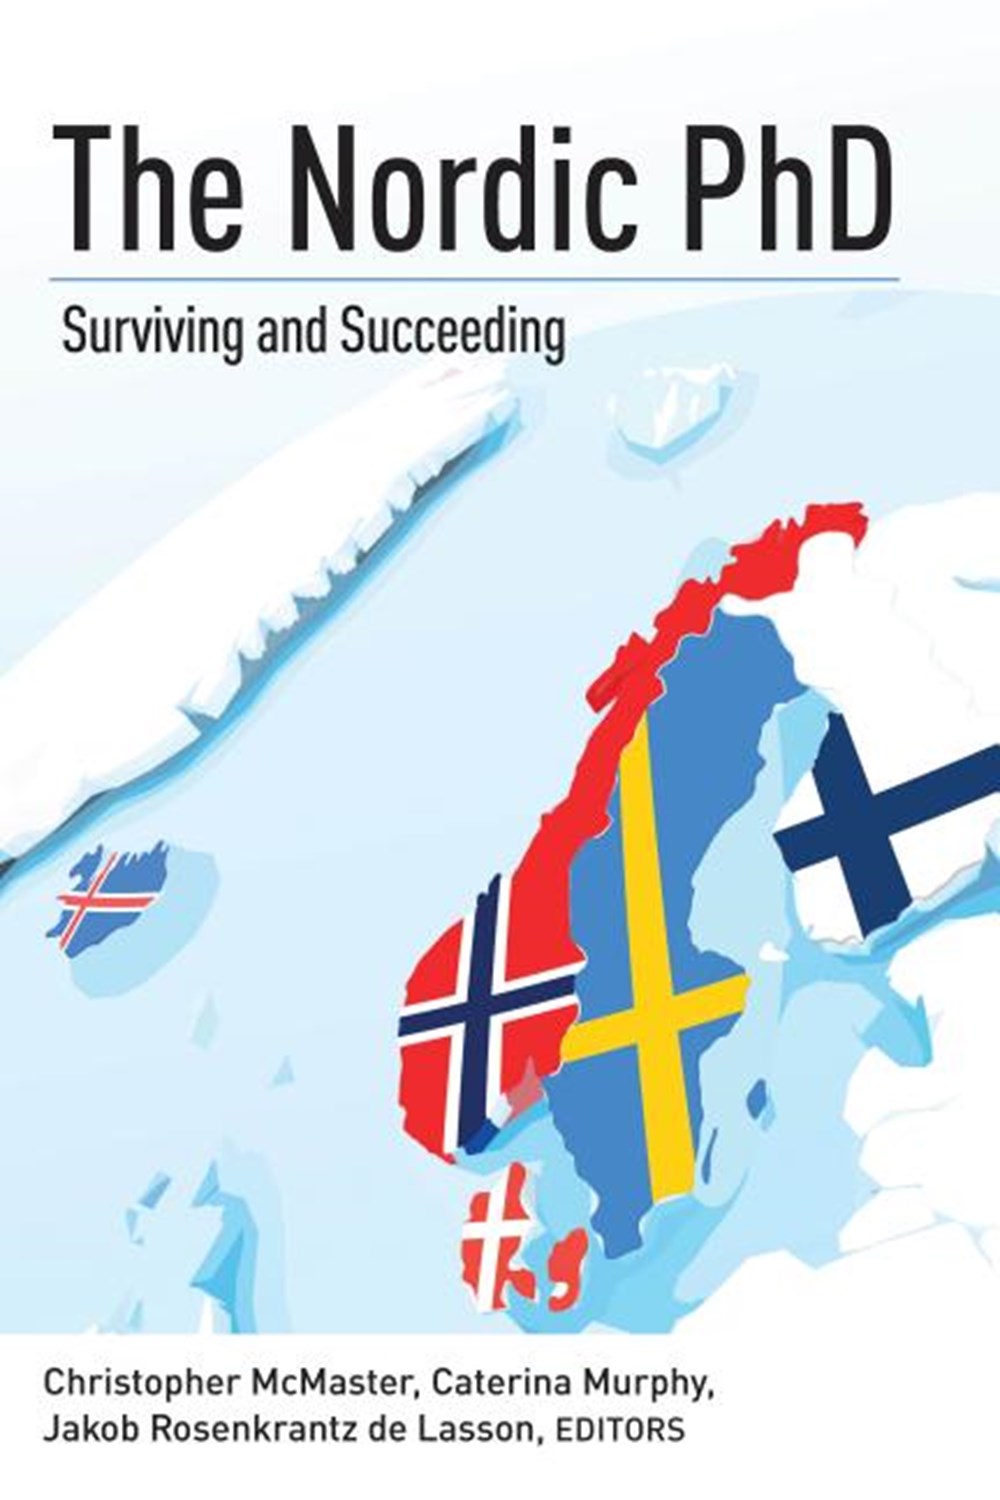 phd courses nordic countries